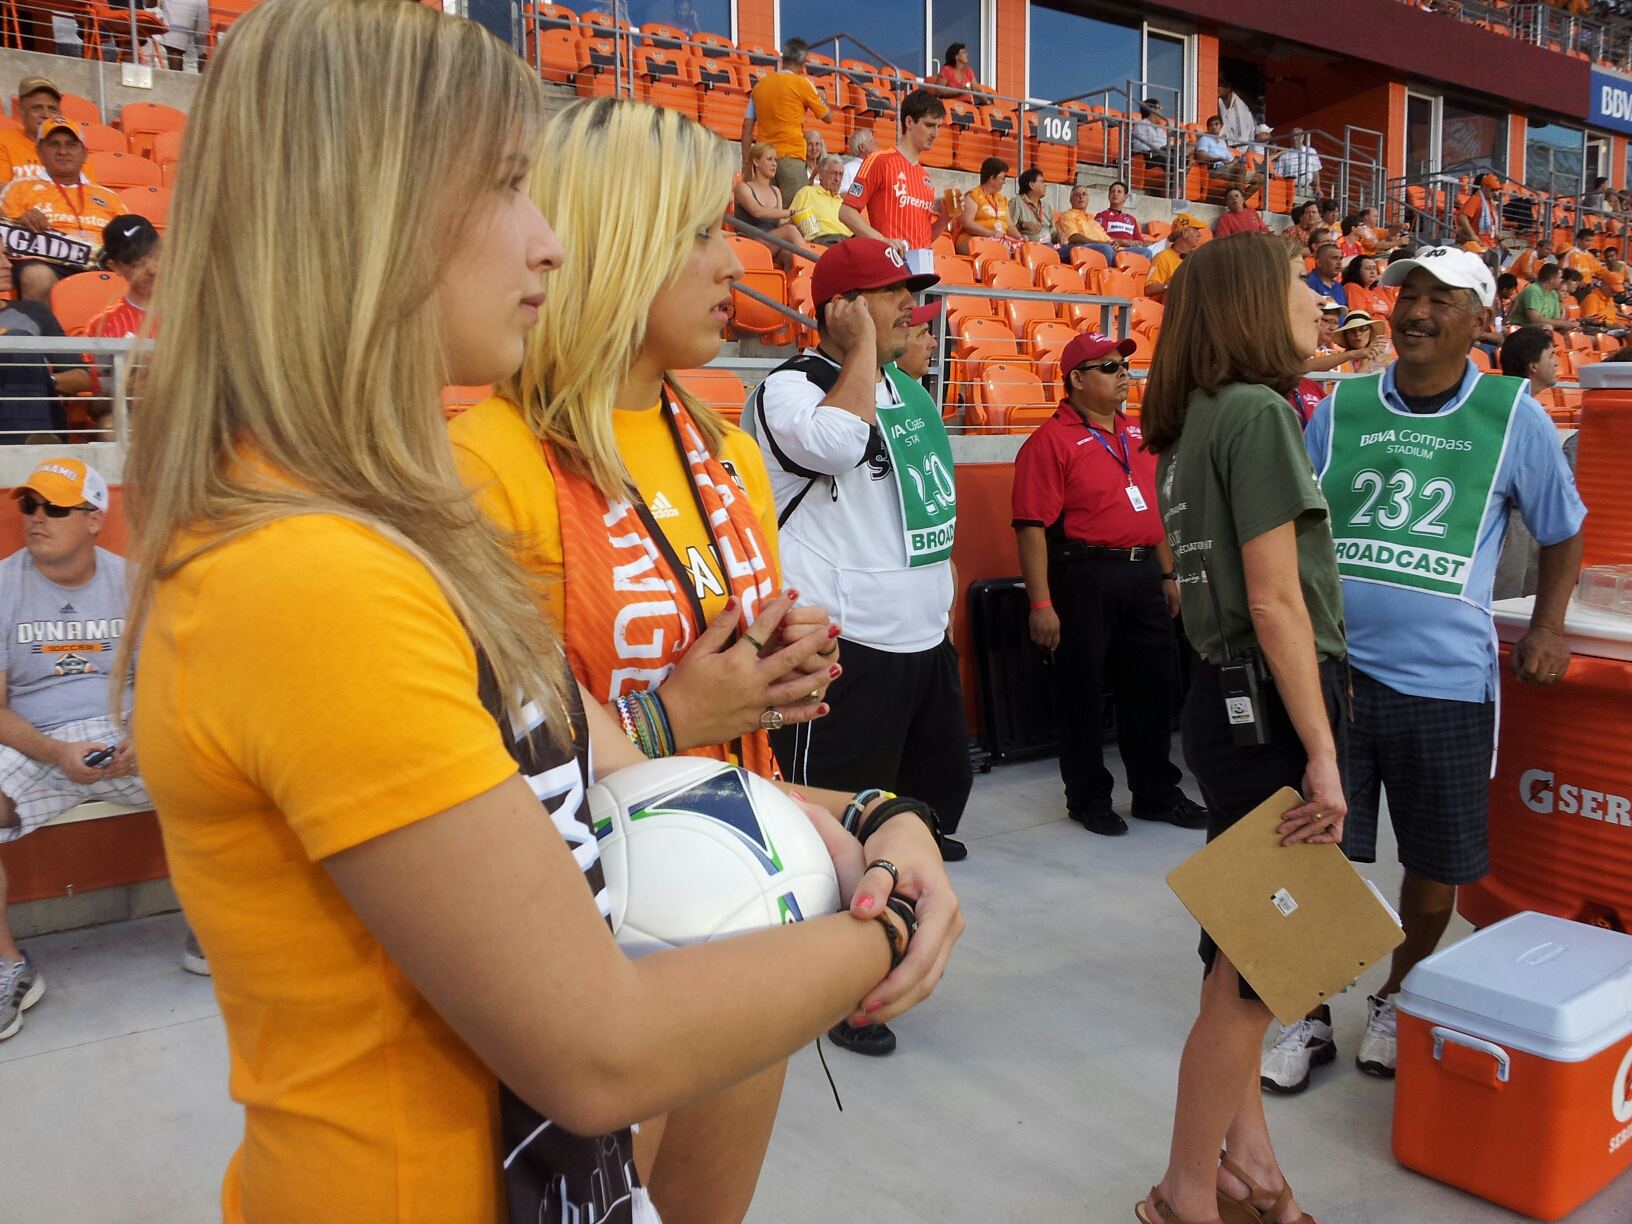 Waiting to deliver the game ball at the Houston Dynamos vs Chicago Fire game.